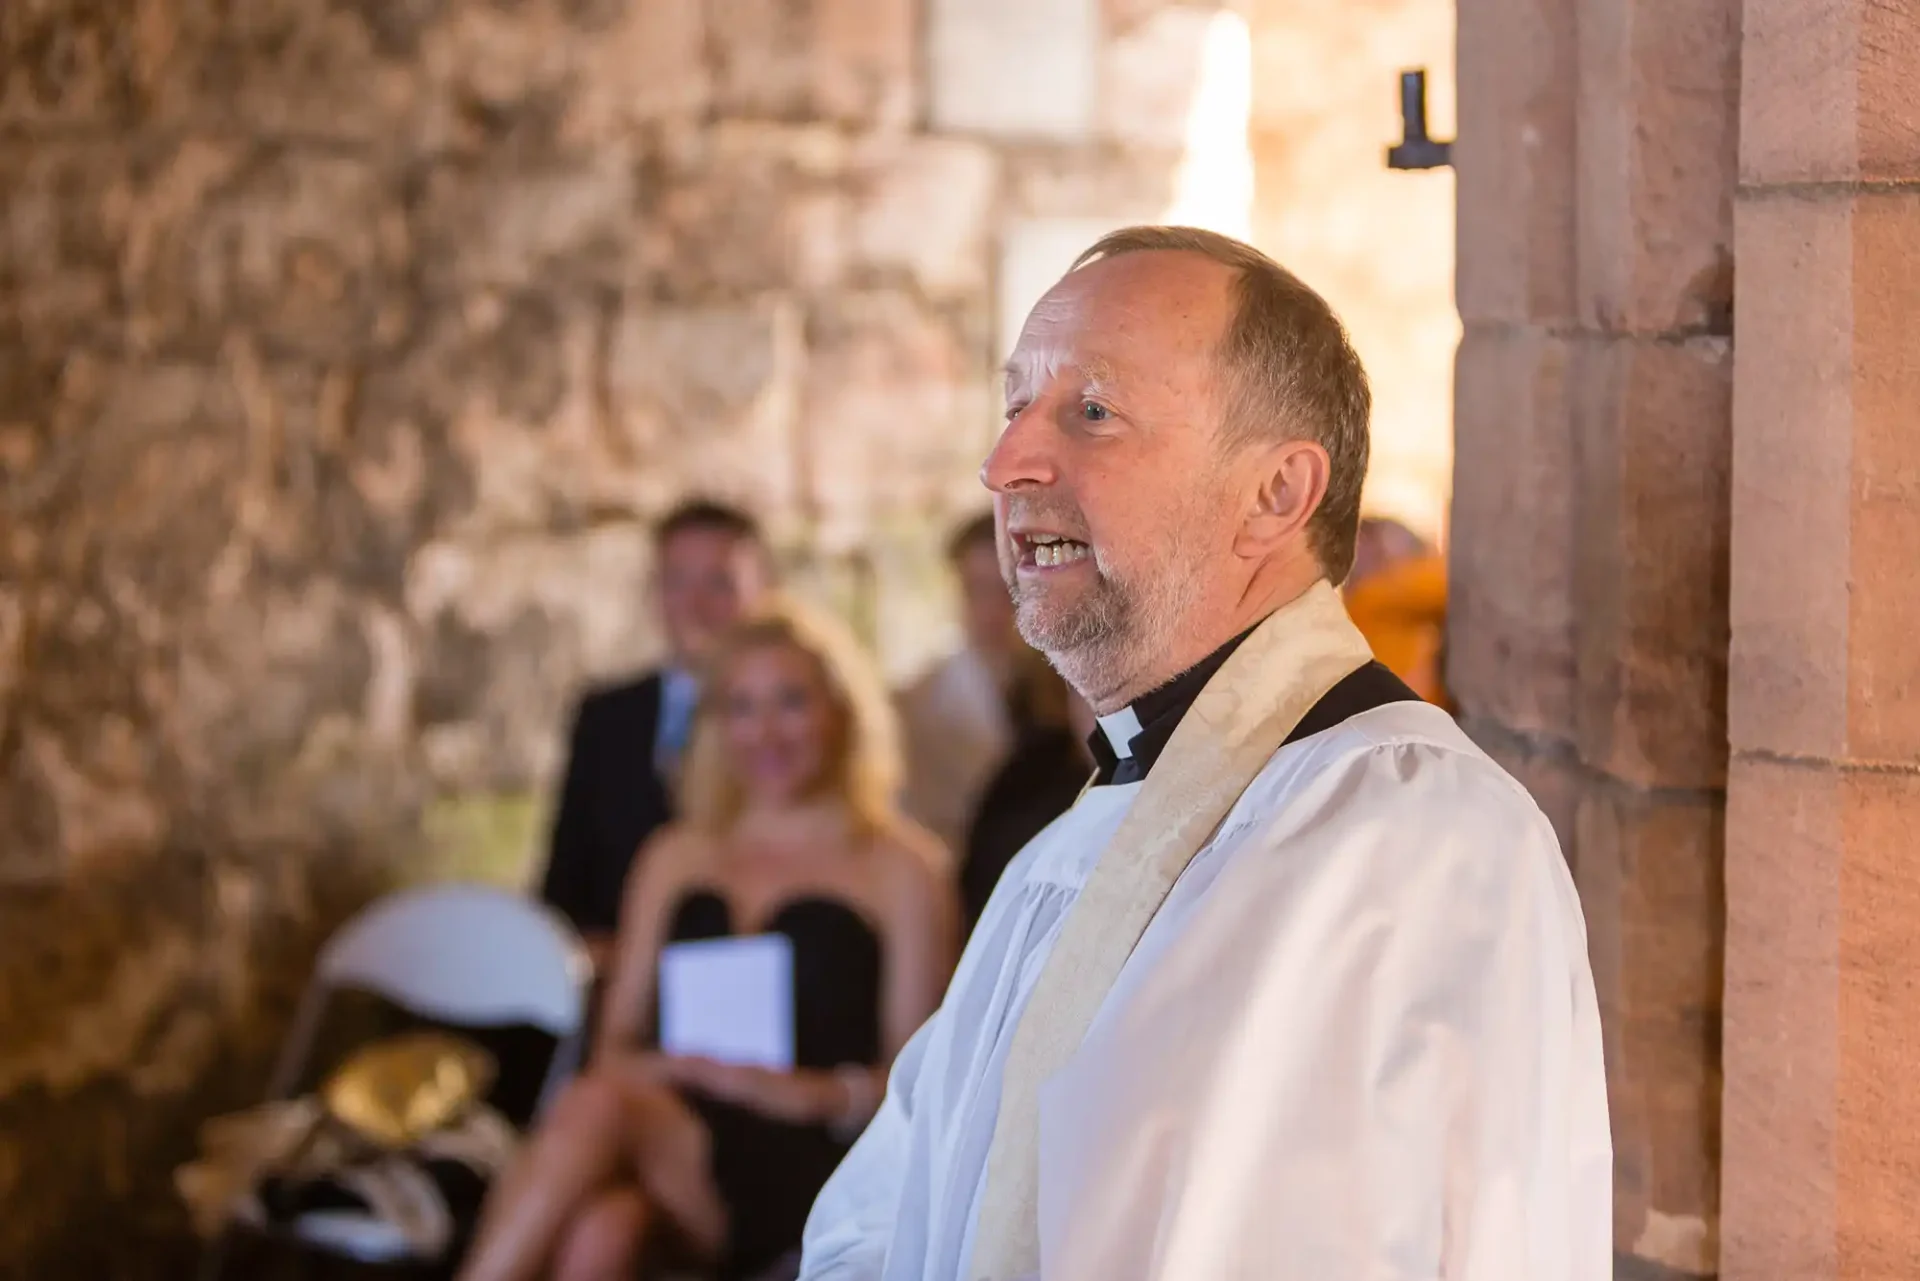 A priest in white vestments speaking at a wedding ceremony in a rustic stone building, with guests visible in the background.